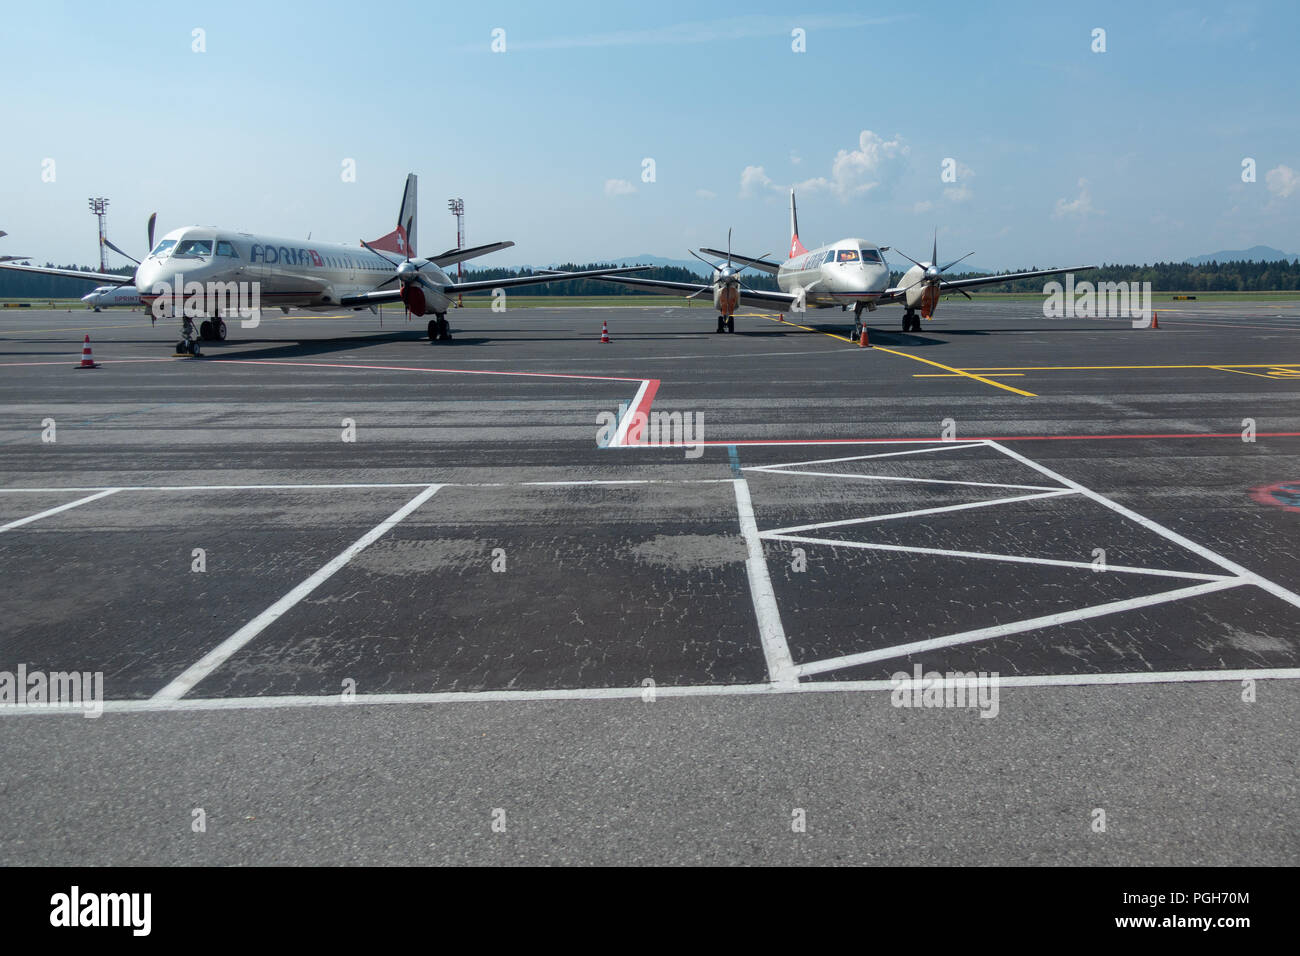 Brnik, Slovenia - August 23 2018: Remains of Darvin Air SA flying as Adria Airways Switzerland. Two SAAB 2000 aircraft on tarmac are left after compan Stock Photo